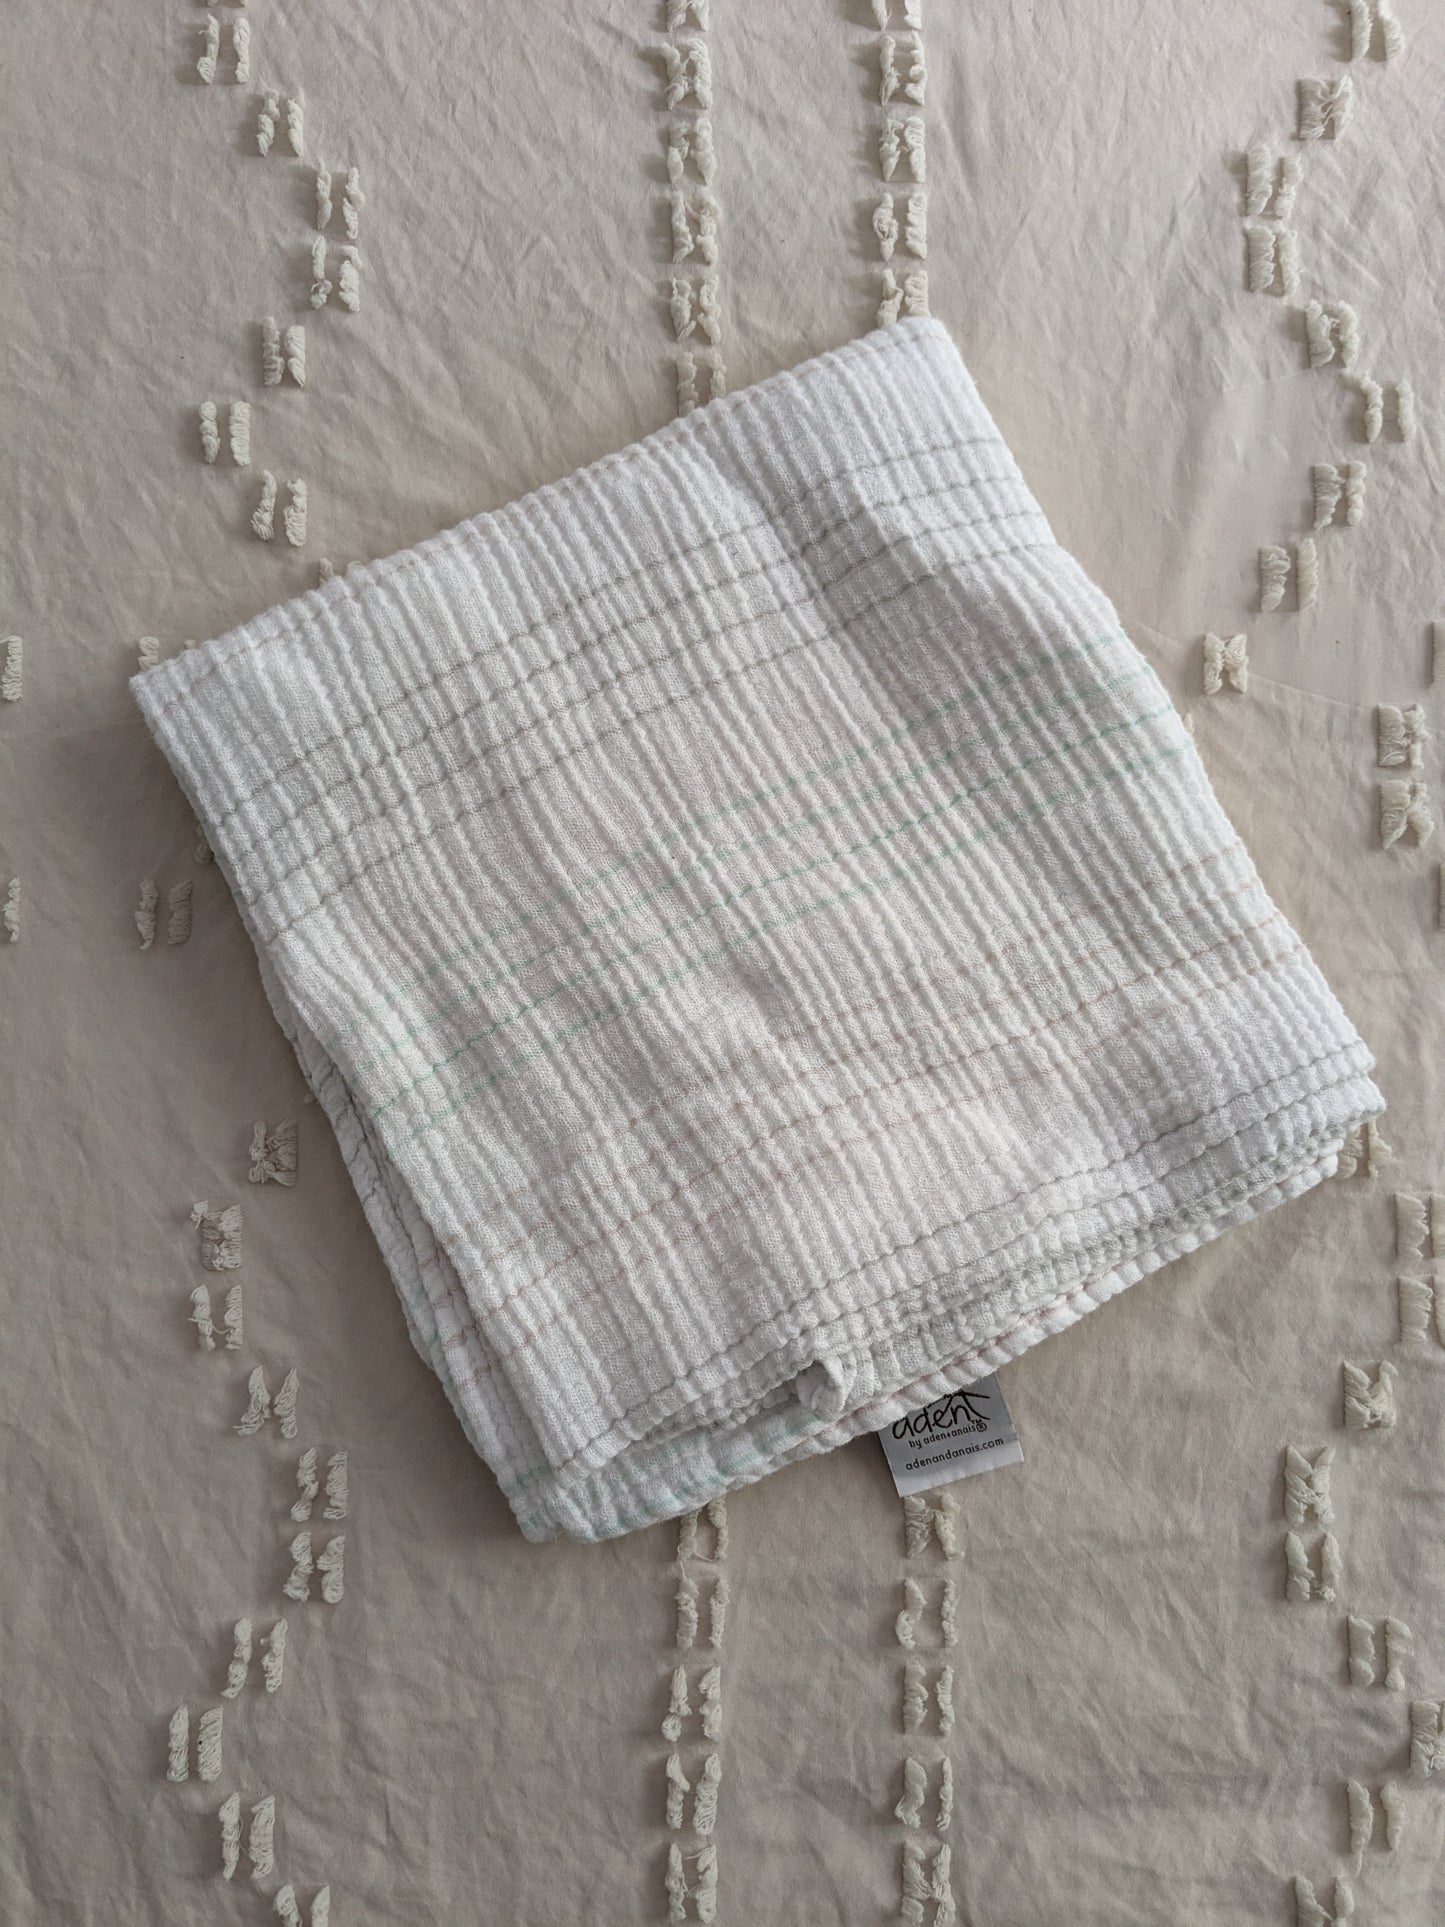 Aden + Anais white with stripes muslin swaddle blanket